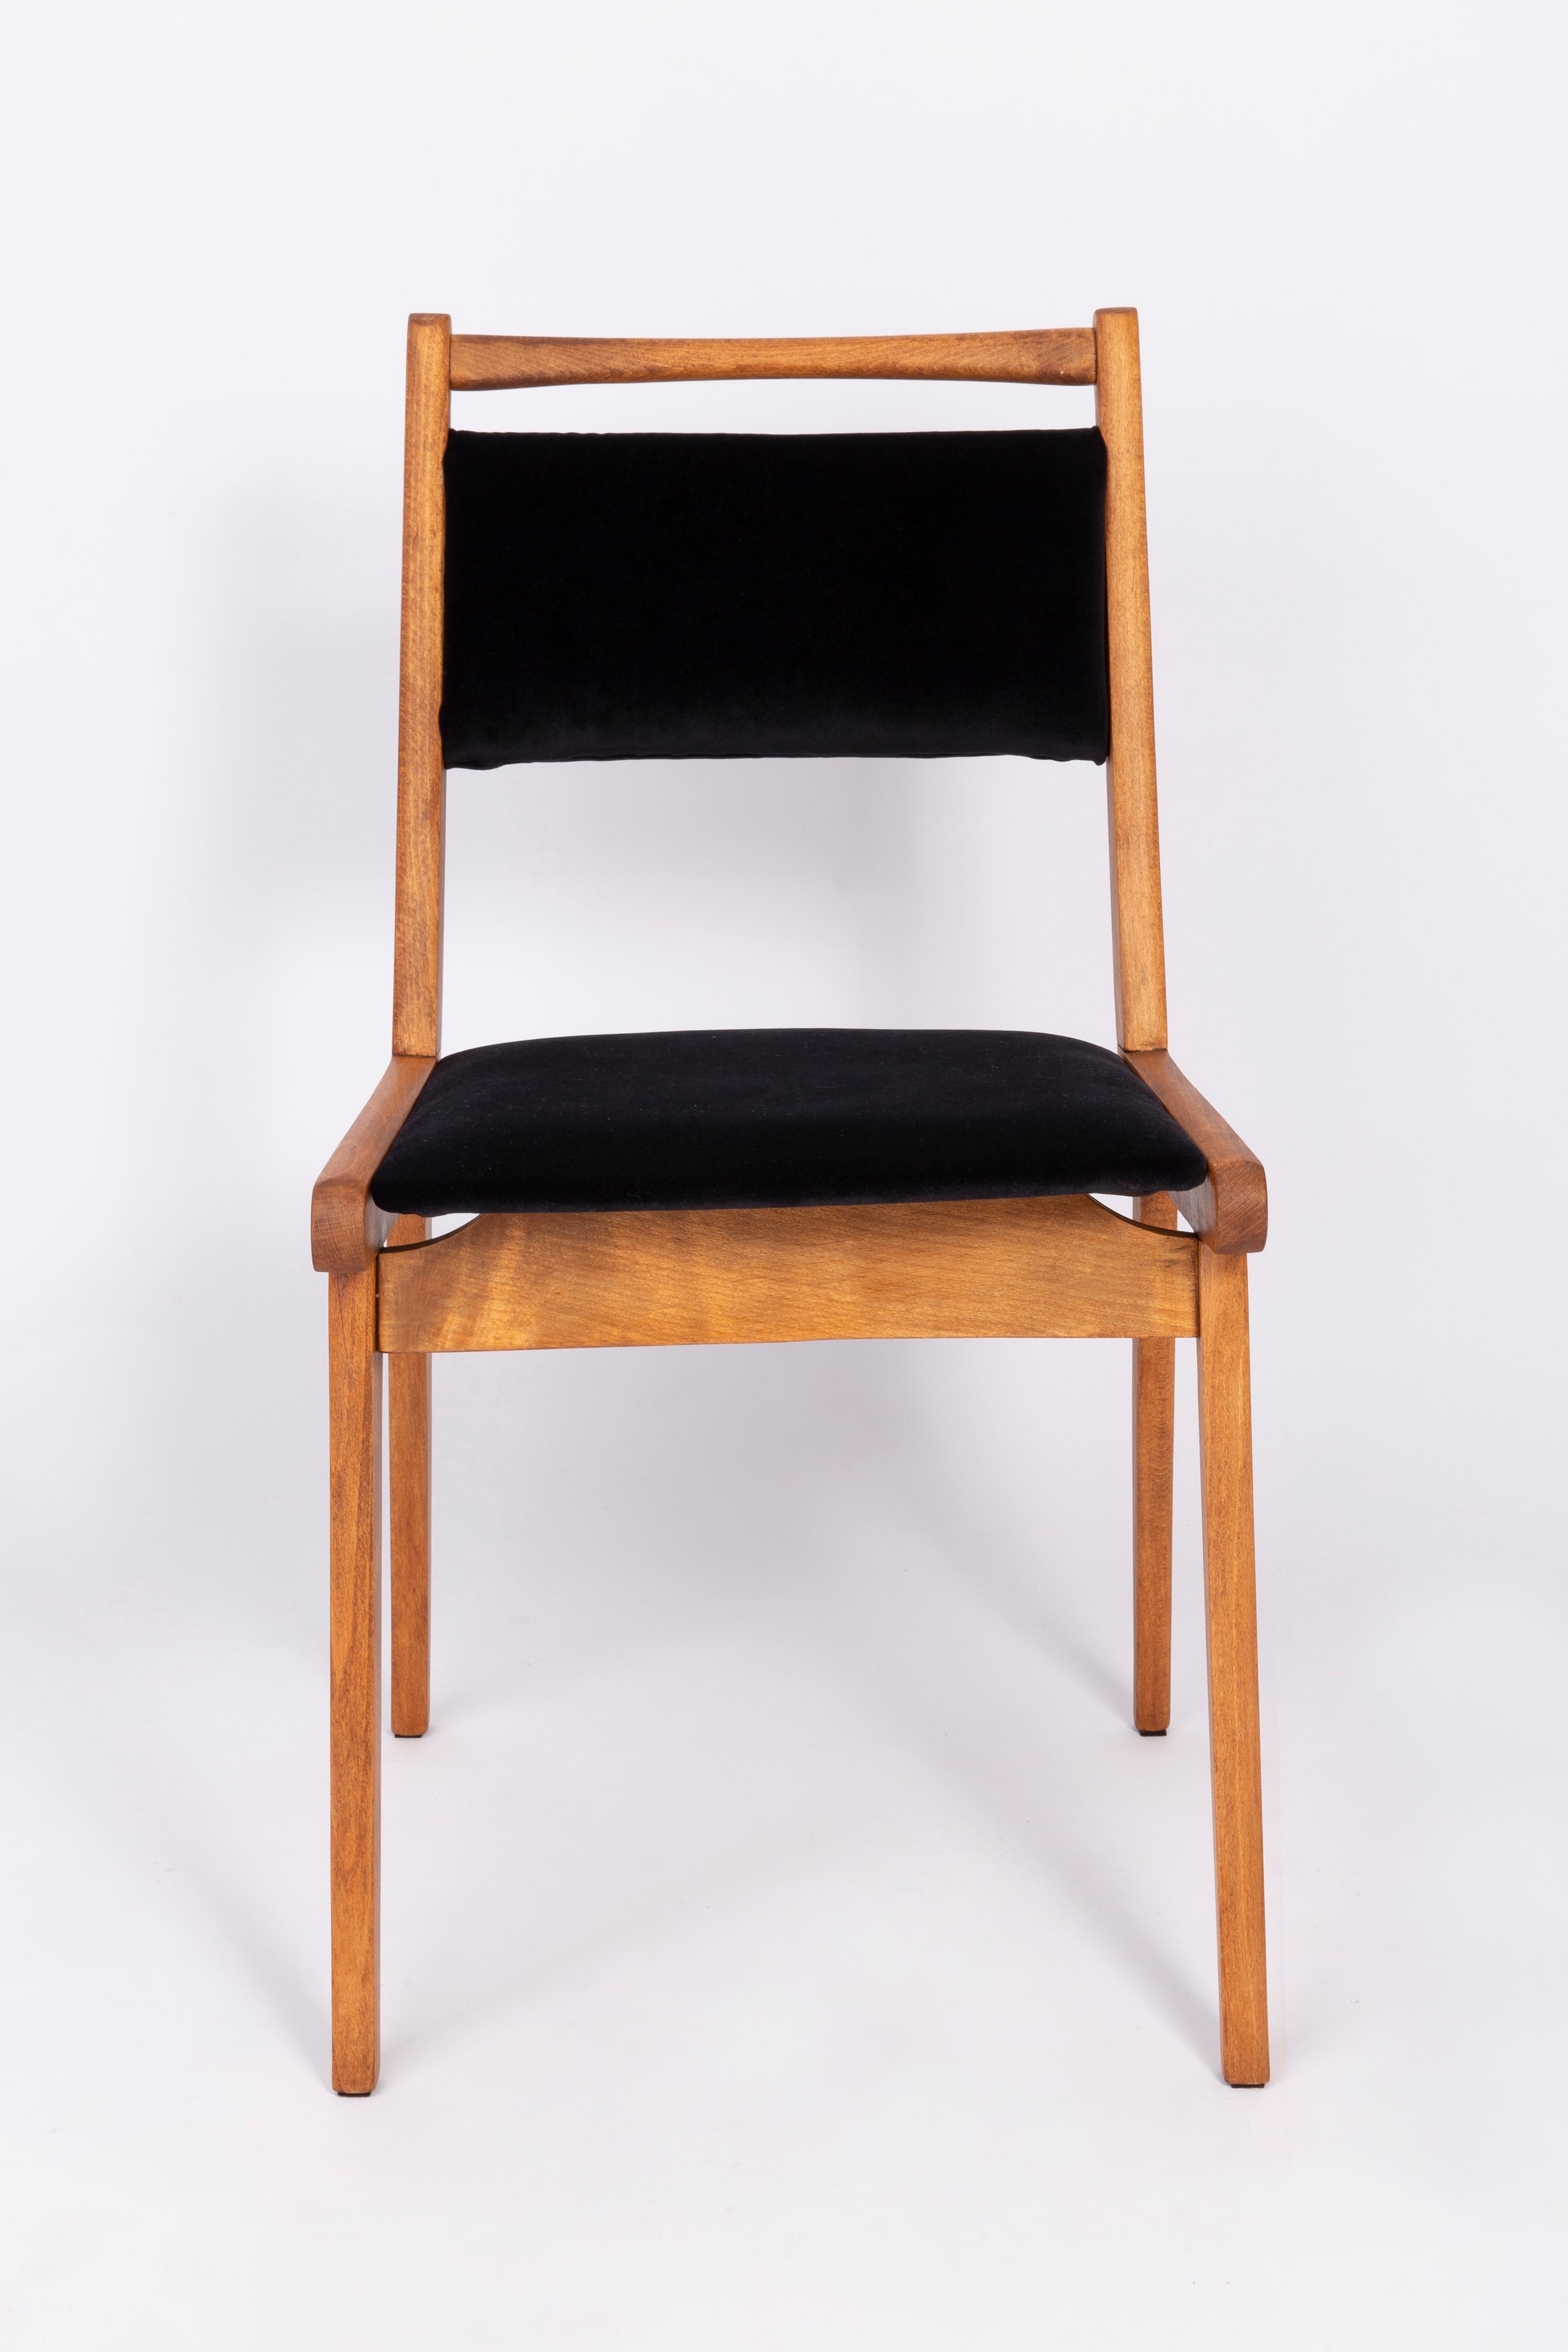 Set of Two 20th Century Black and White Velvet Chairs, Poland, 1960s For Sale 4